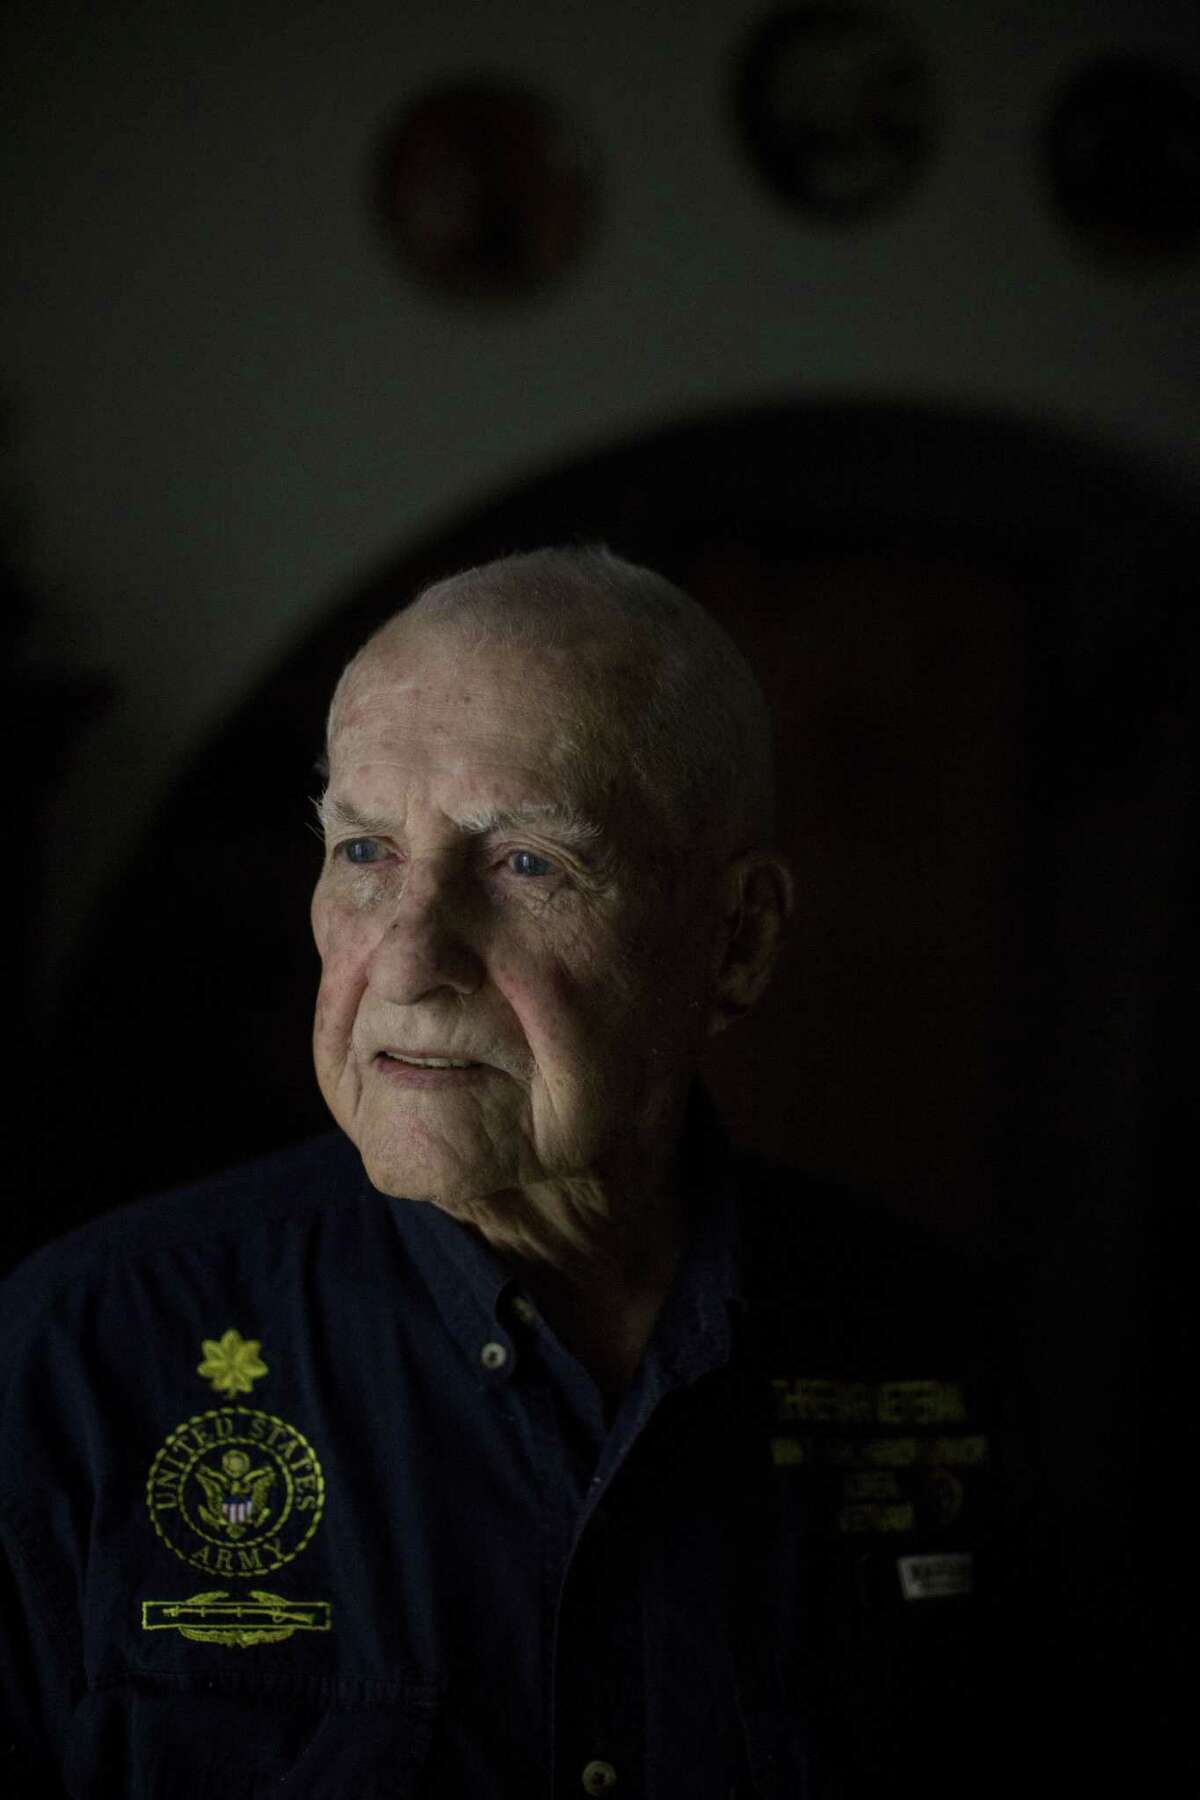 Virgil Lee Ward, a 95-year-old veteran who was stationed in Hawaii during the attack on Pearl Harbor, stands for a portrait in his home in San Antonio, Texas on December 1, 2016.